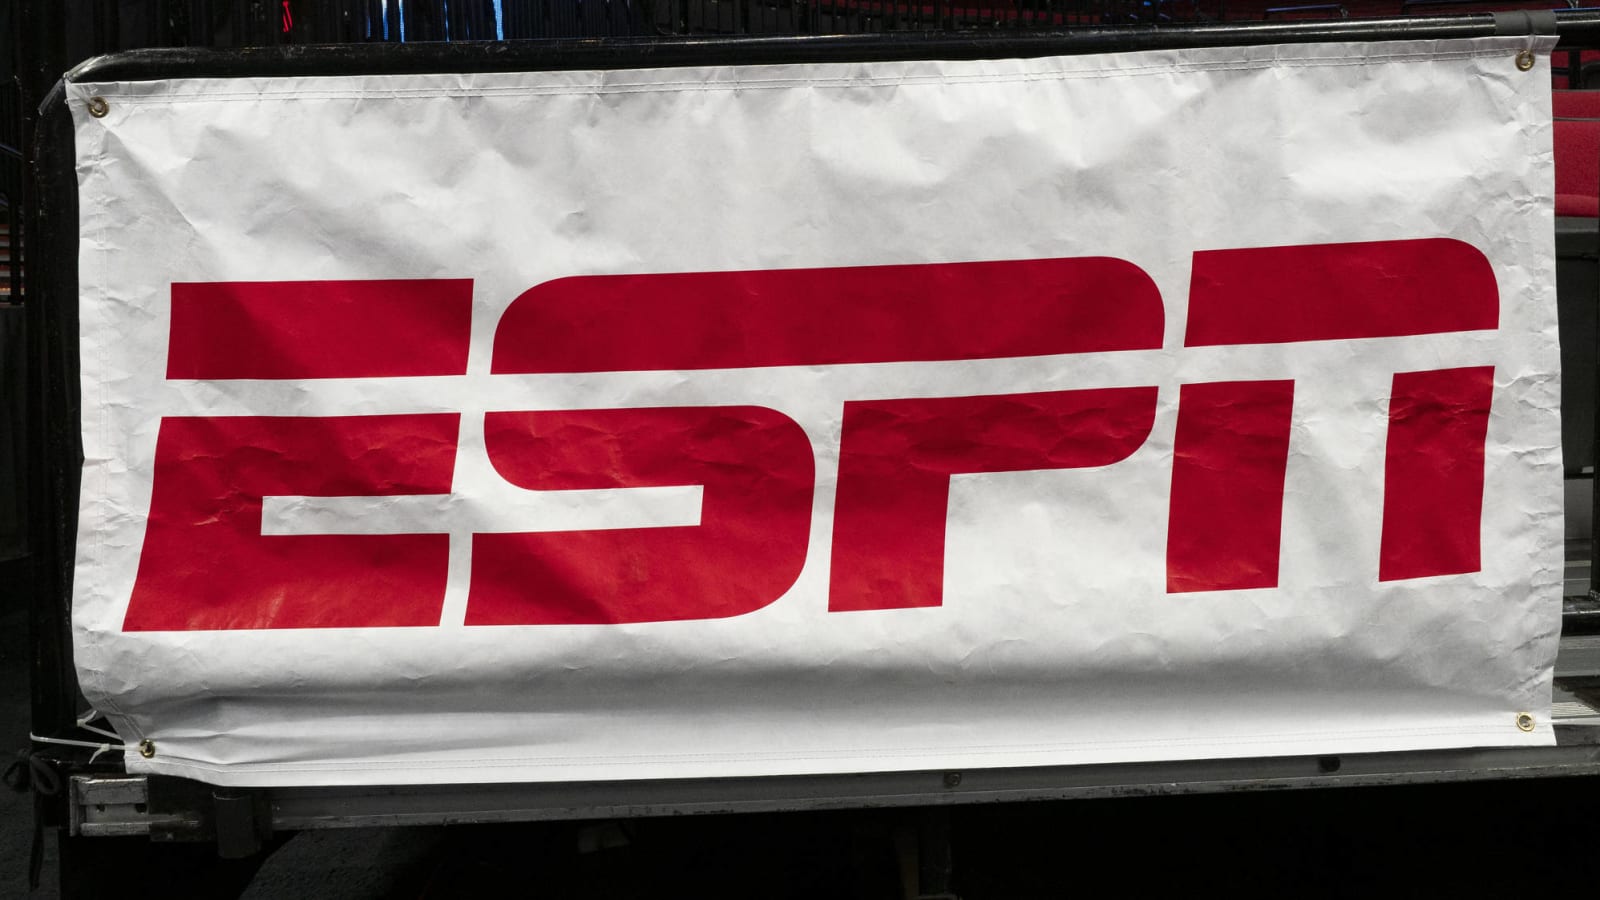 ESPN delivers strong response to Big 12 cease-and-desist letter